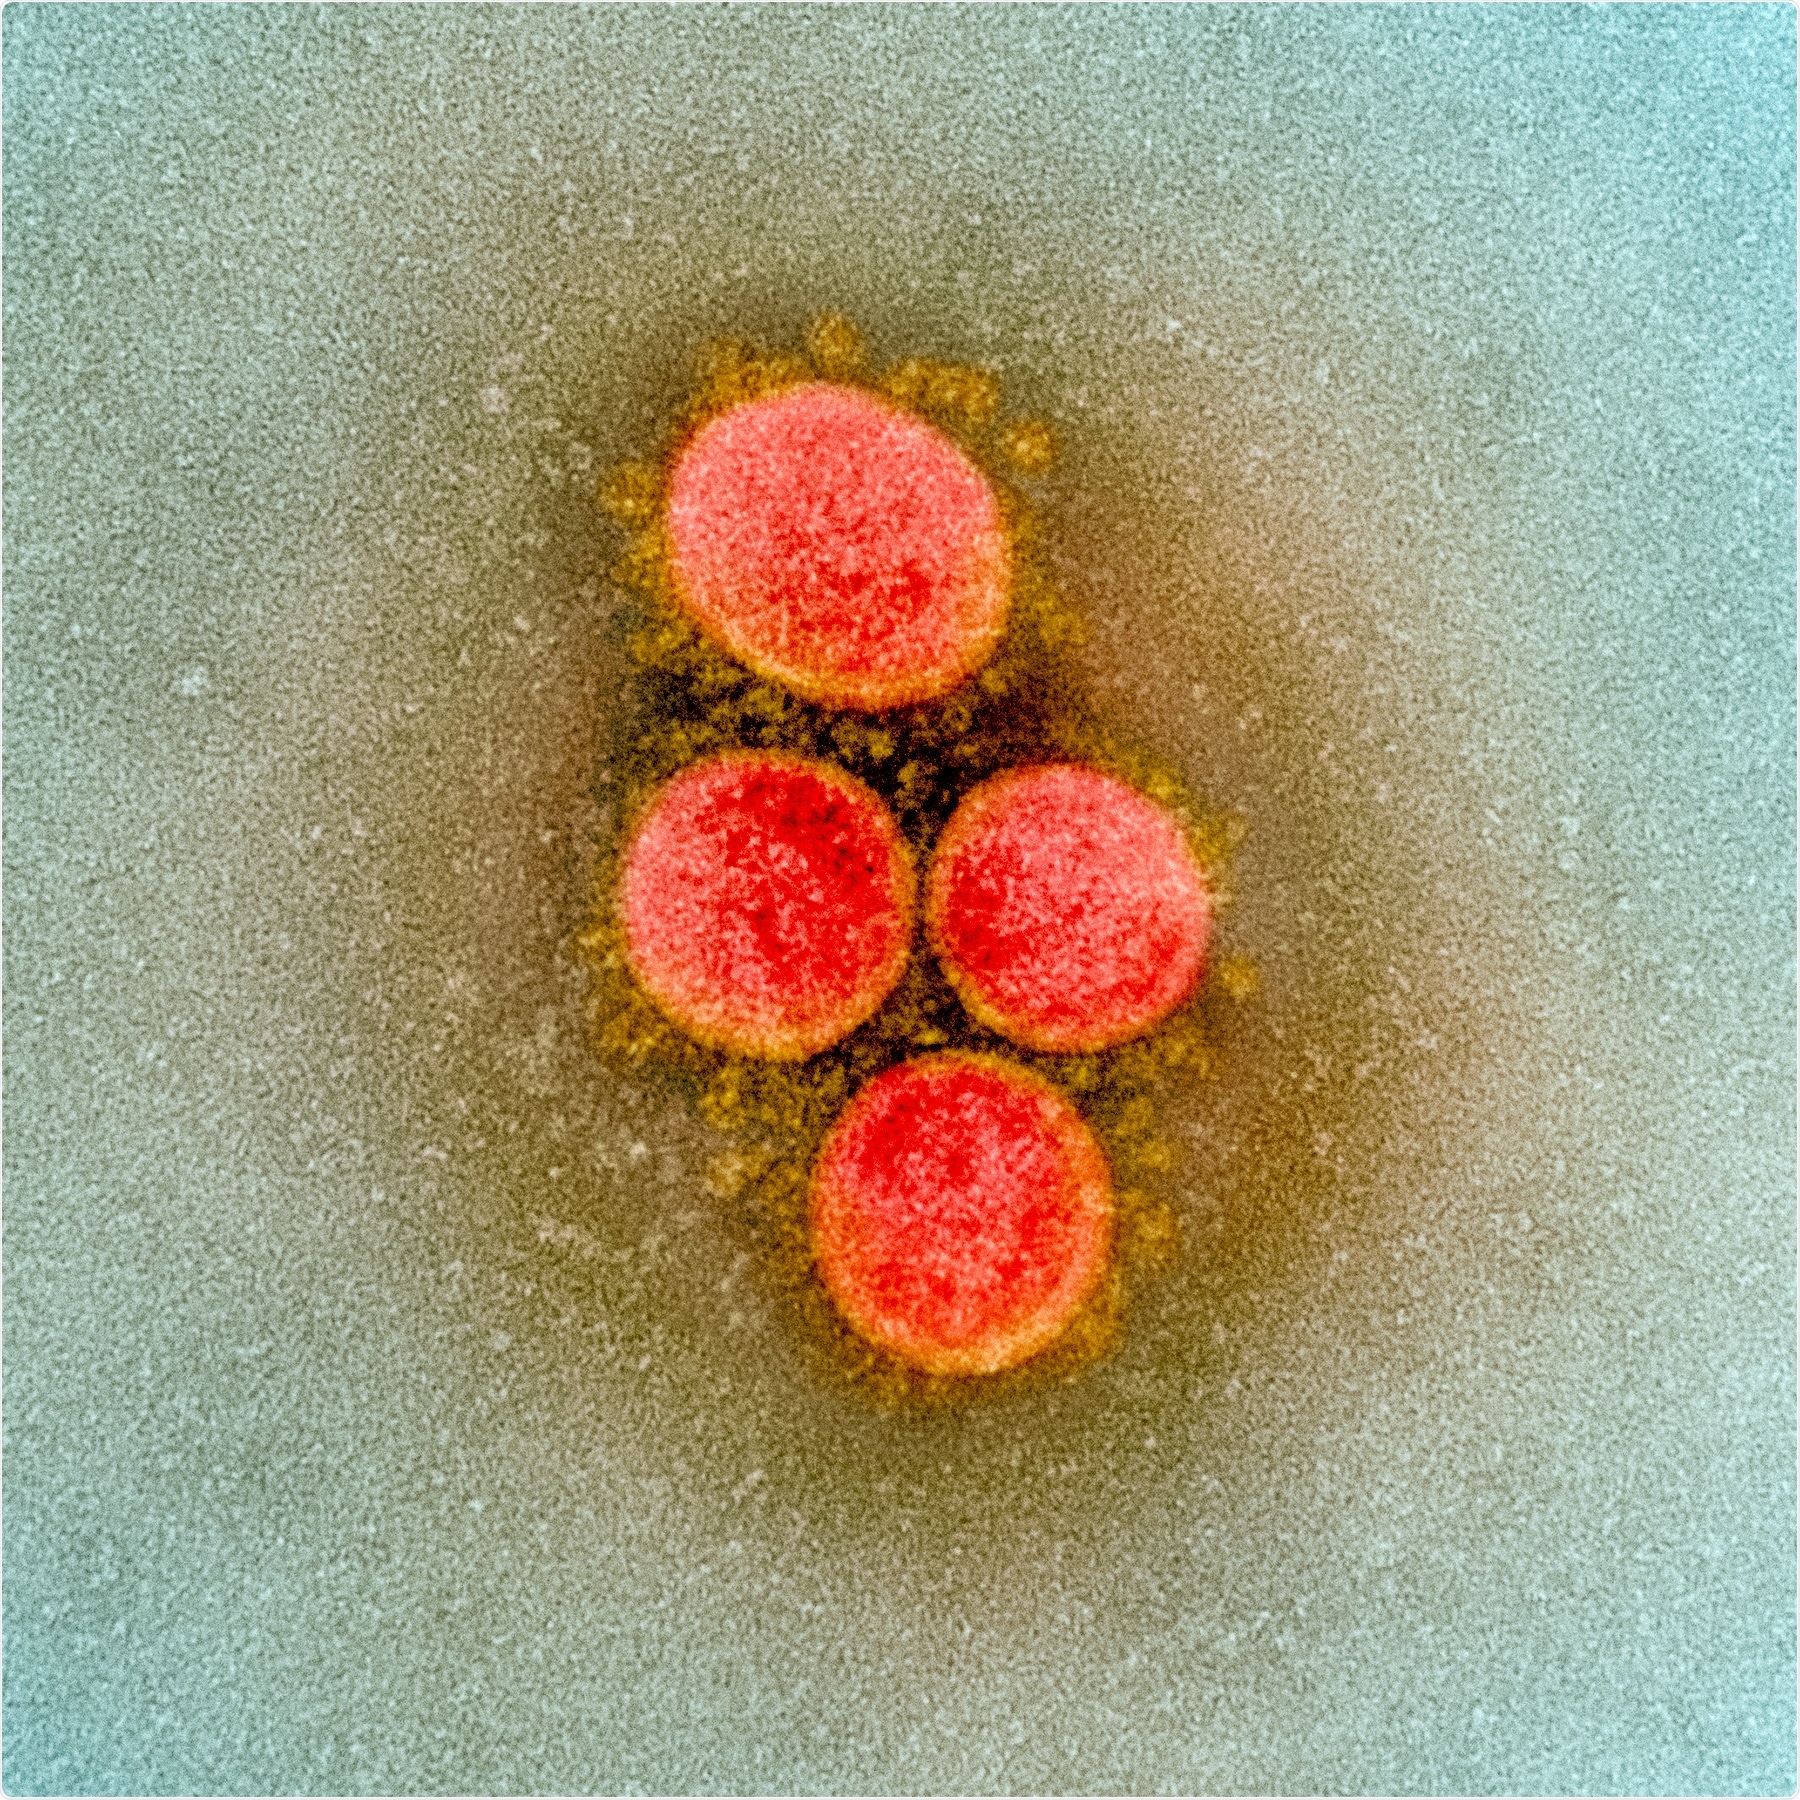 Study: Emergence of multiple SARS-CoV-2 mutations in an immunocompromised host. Image Credit: NIAID